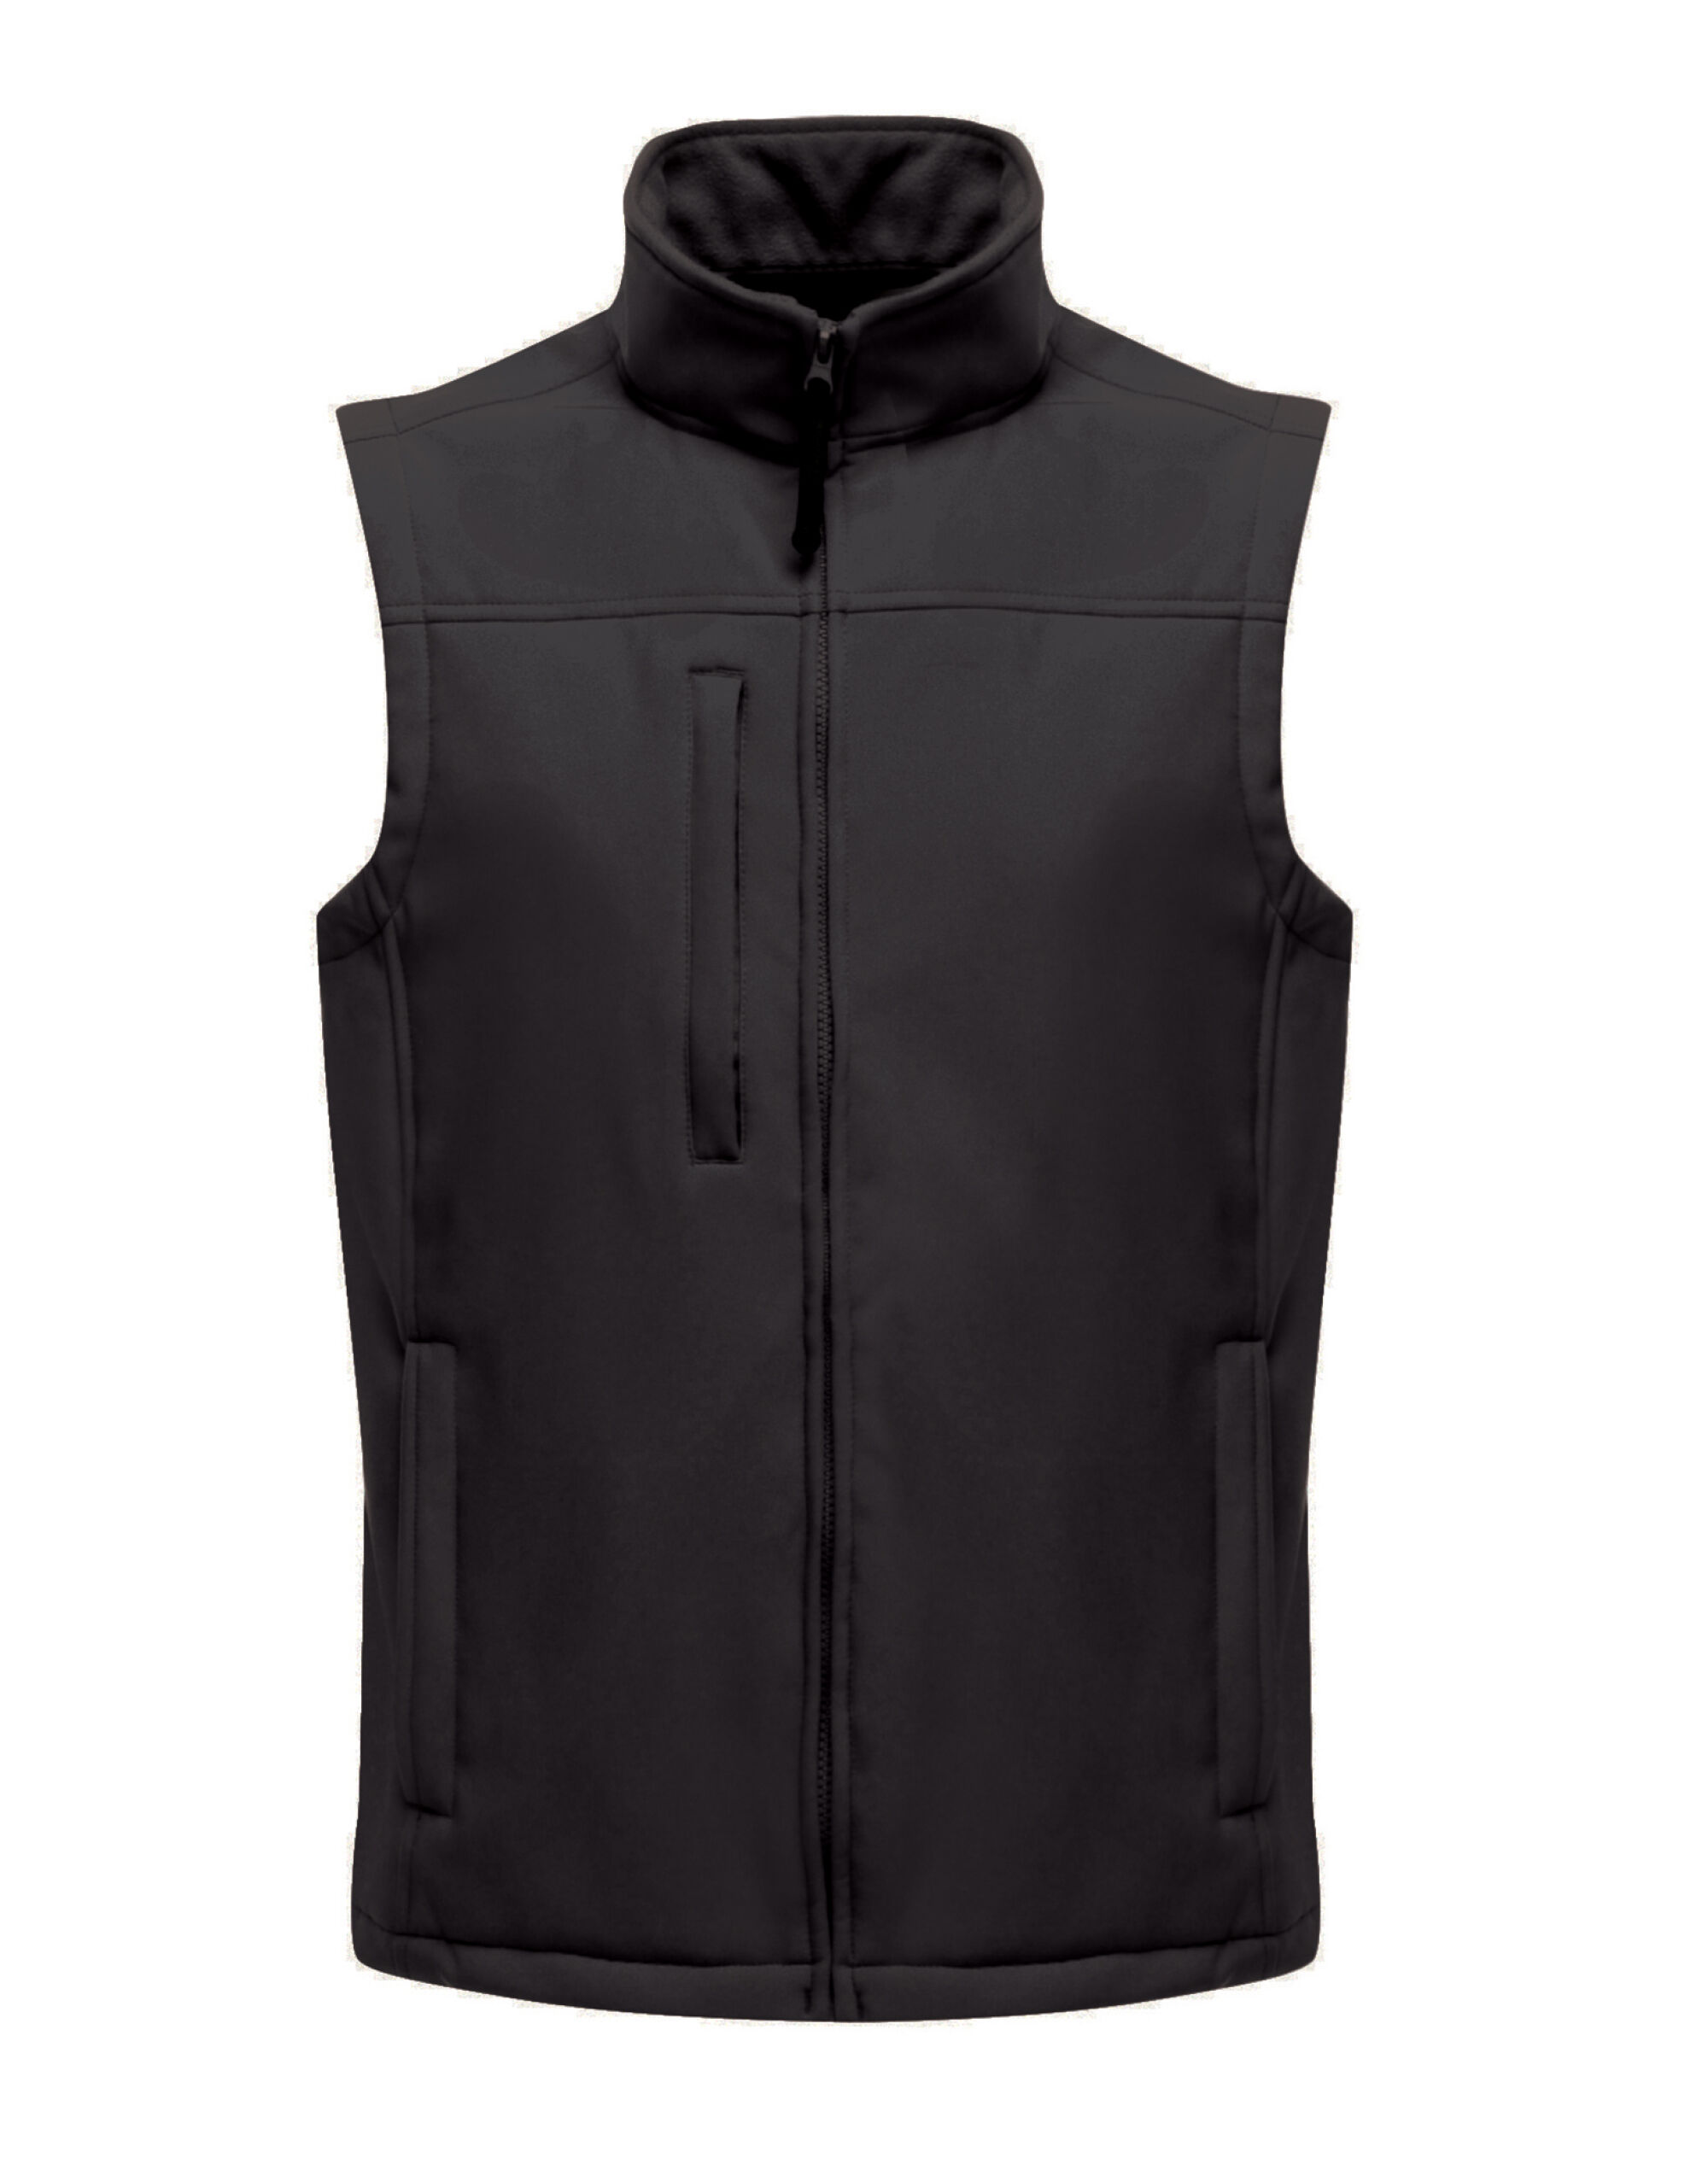 Men's Flux Soft Shell Gilet - Knights Overall Protection